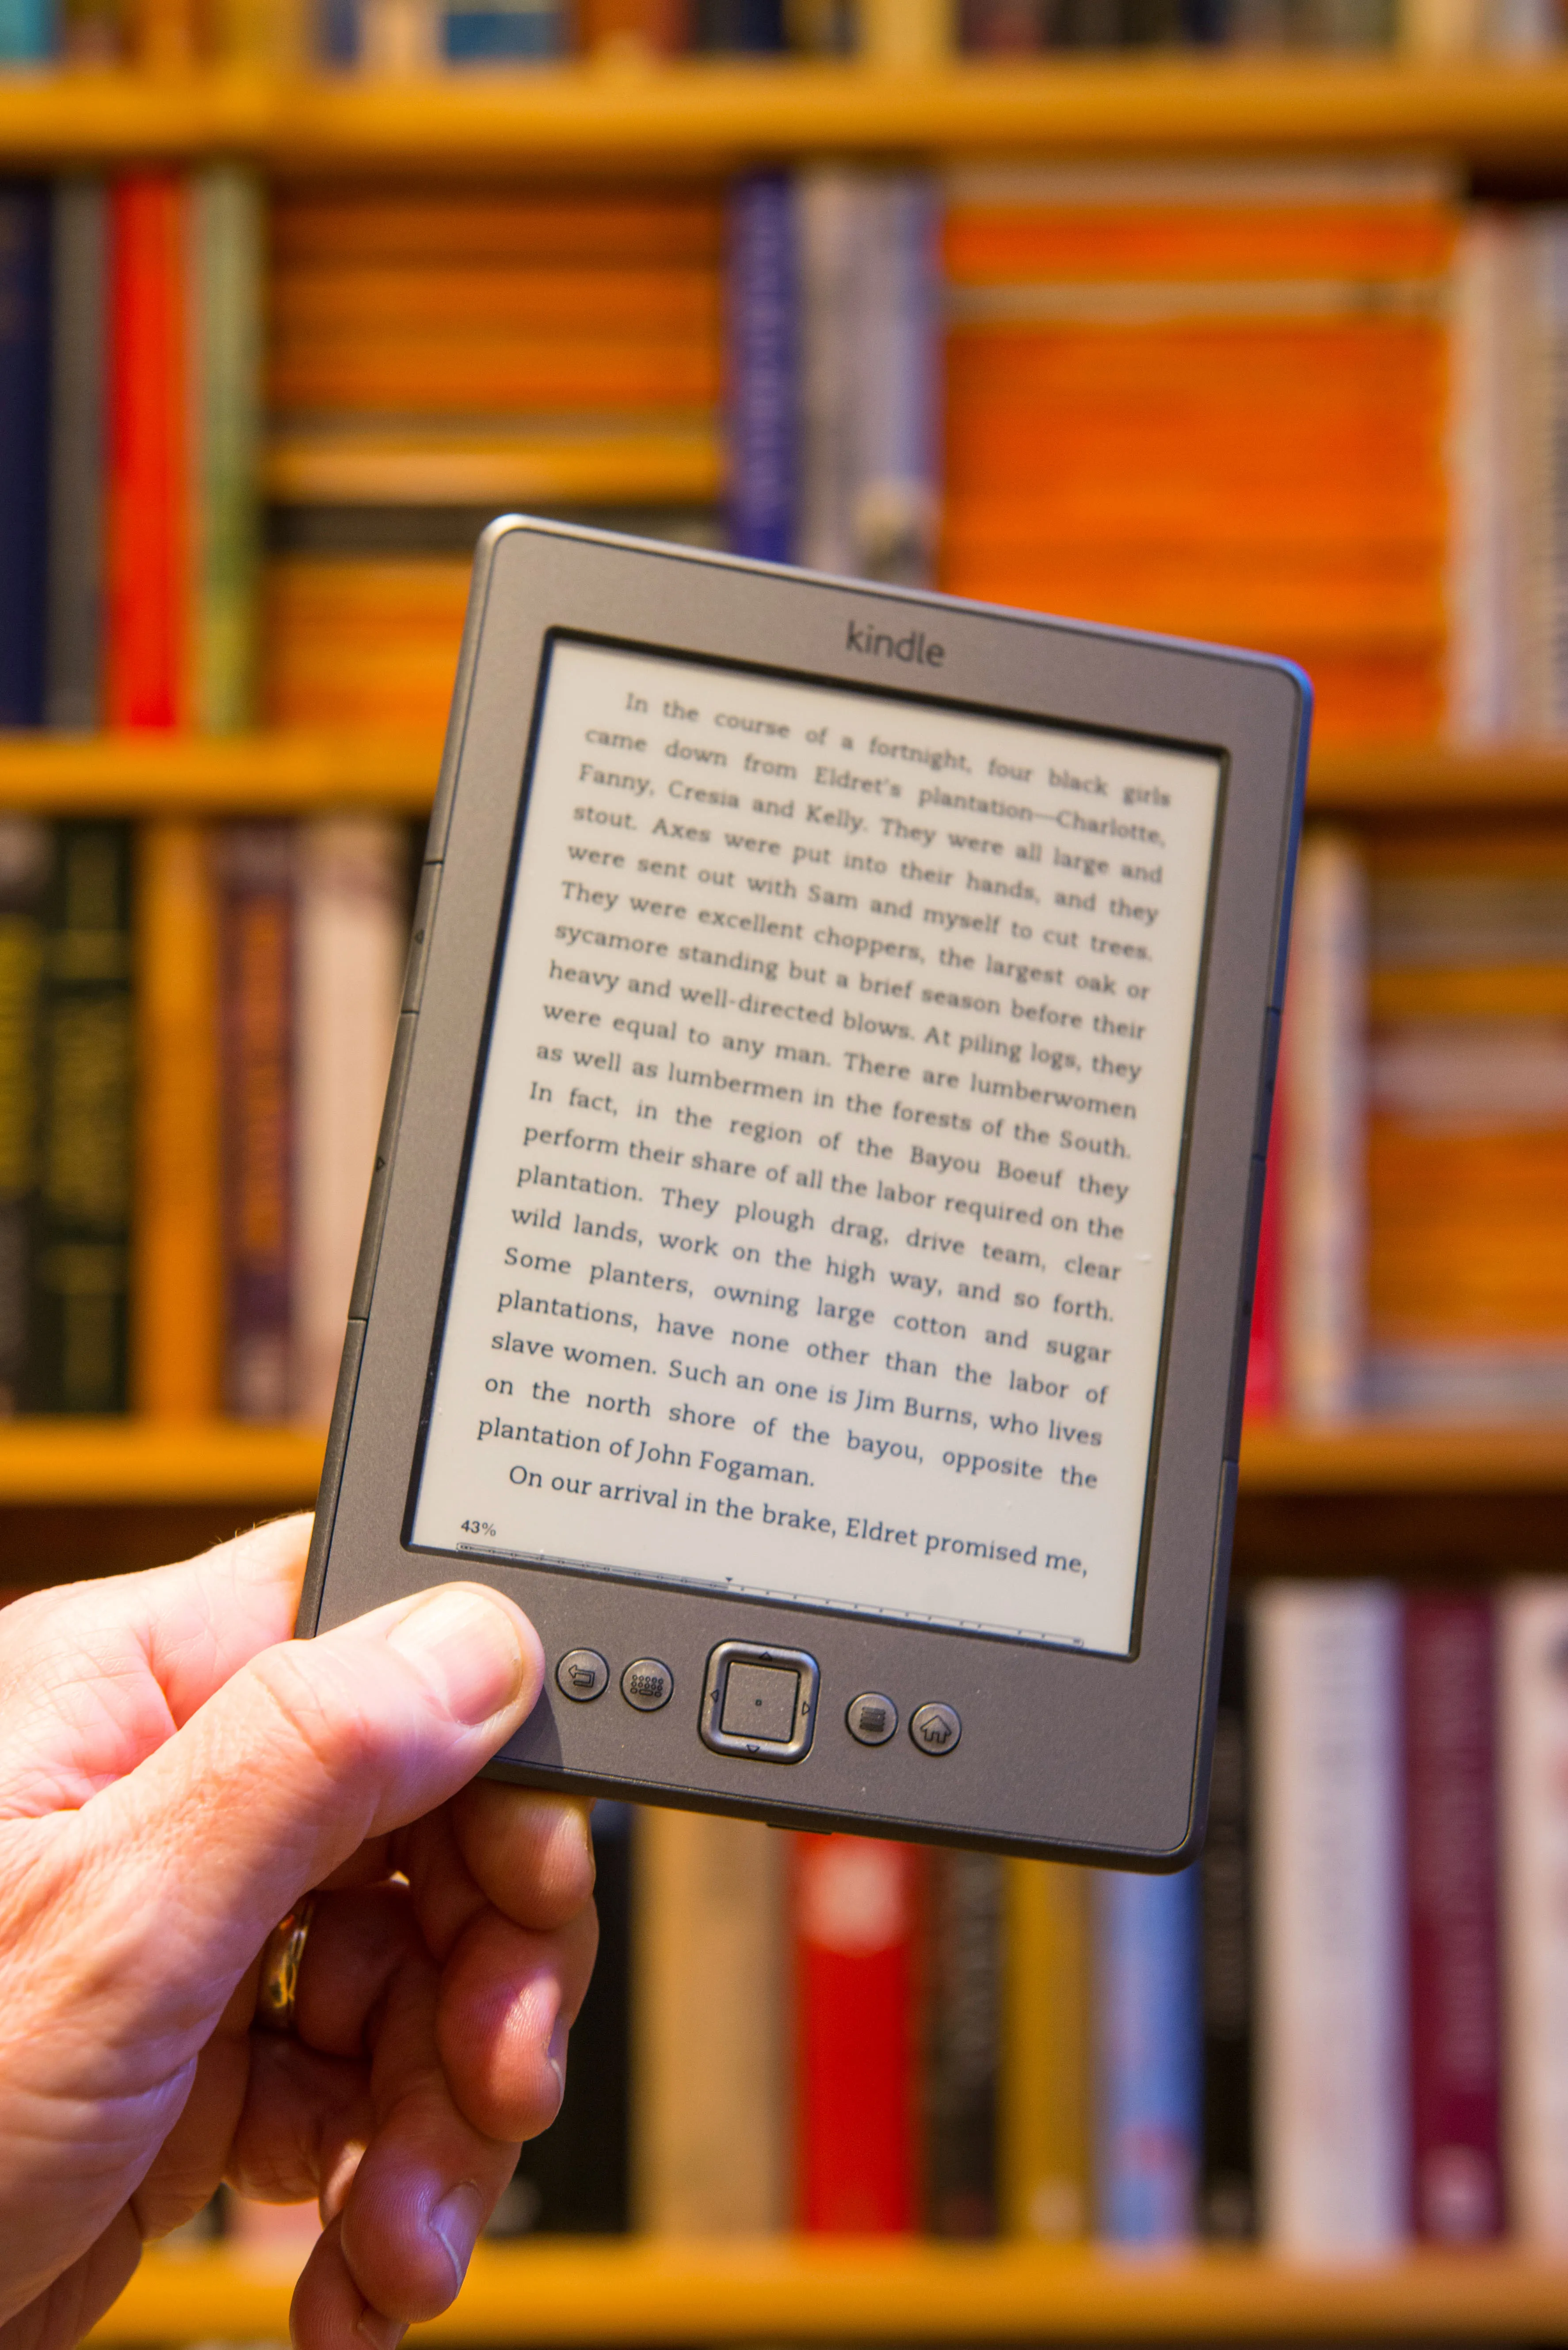 can epub books be read on kindle